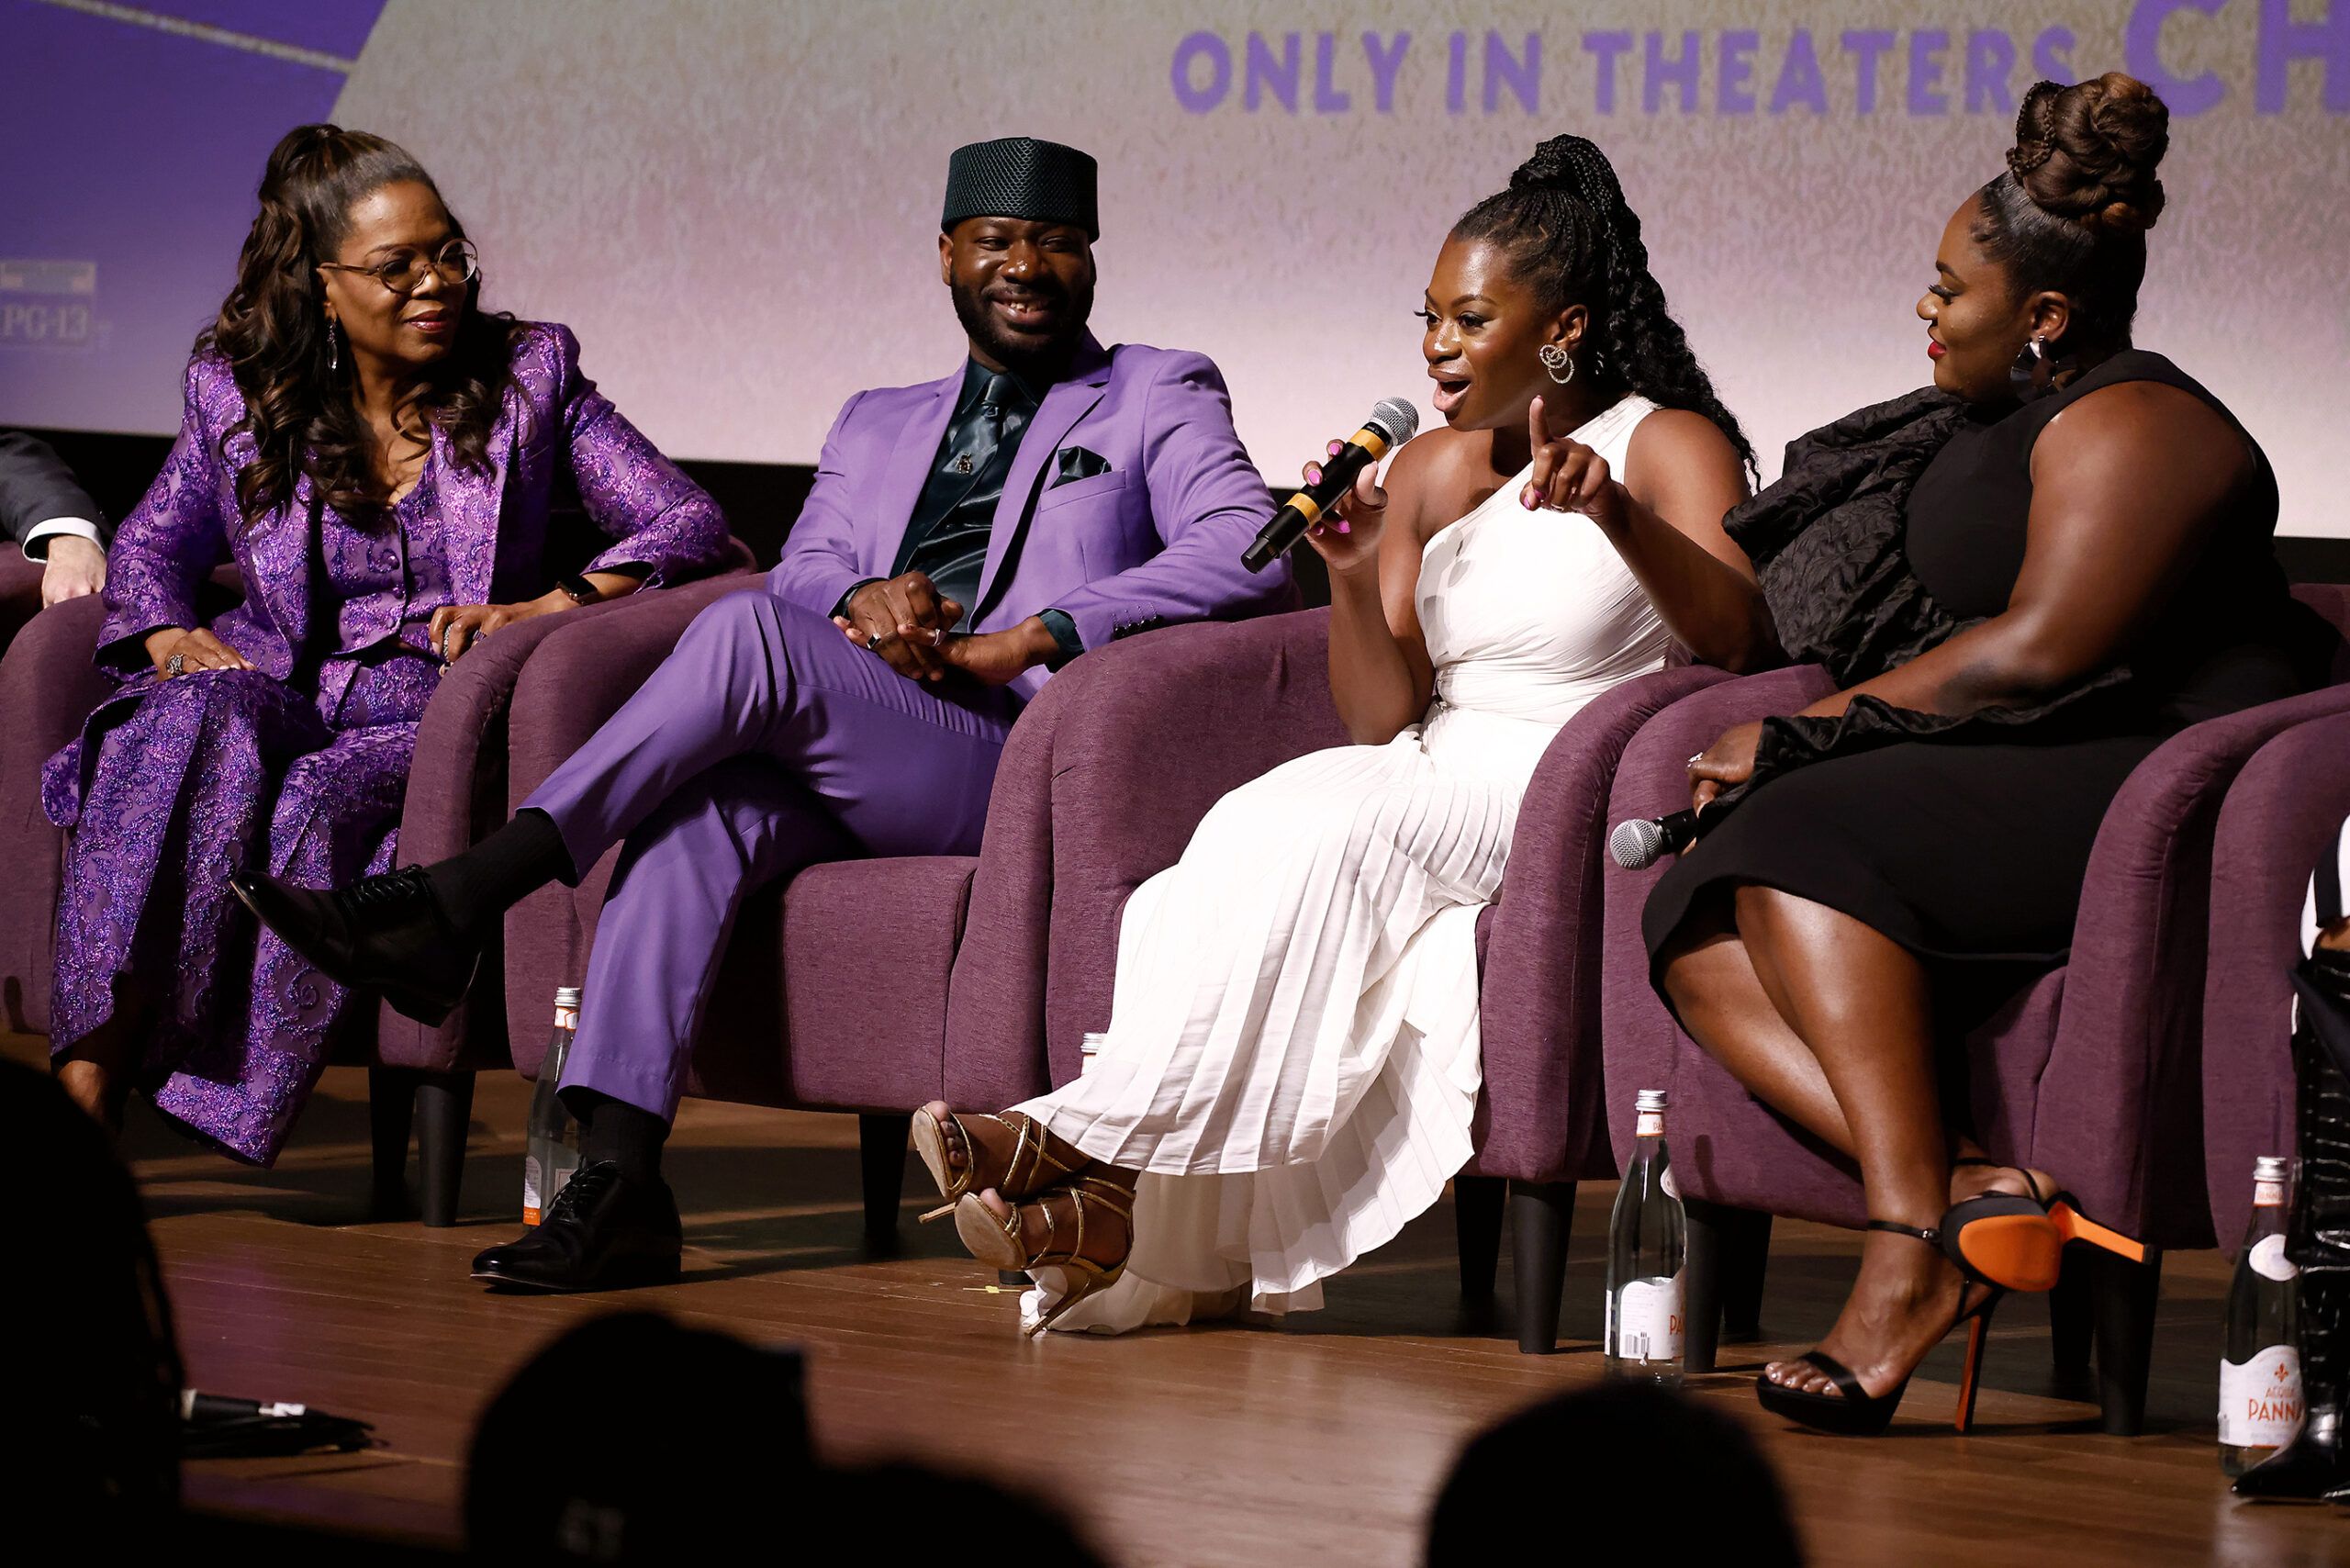 Red Carpet Rundown: The Color Purple DC Screening At National Museum Of African American History And Culture